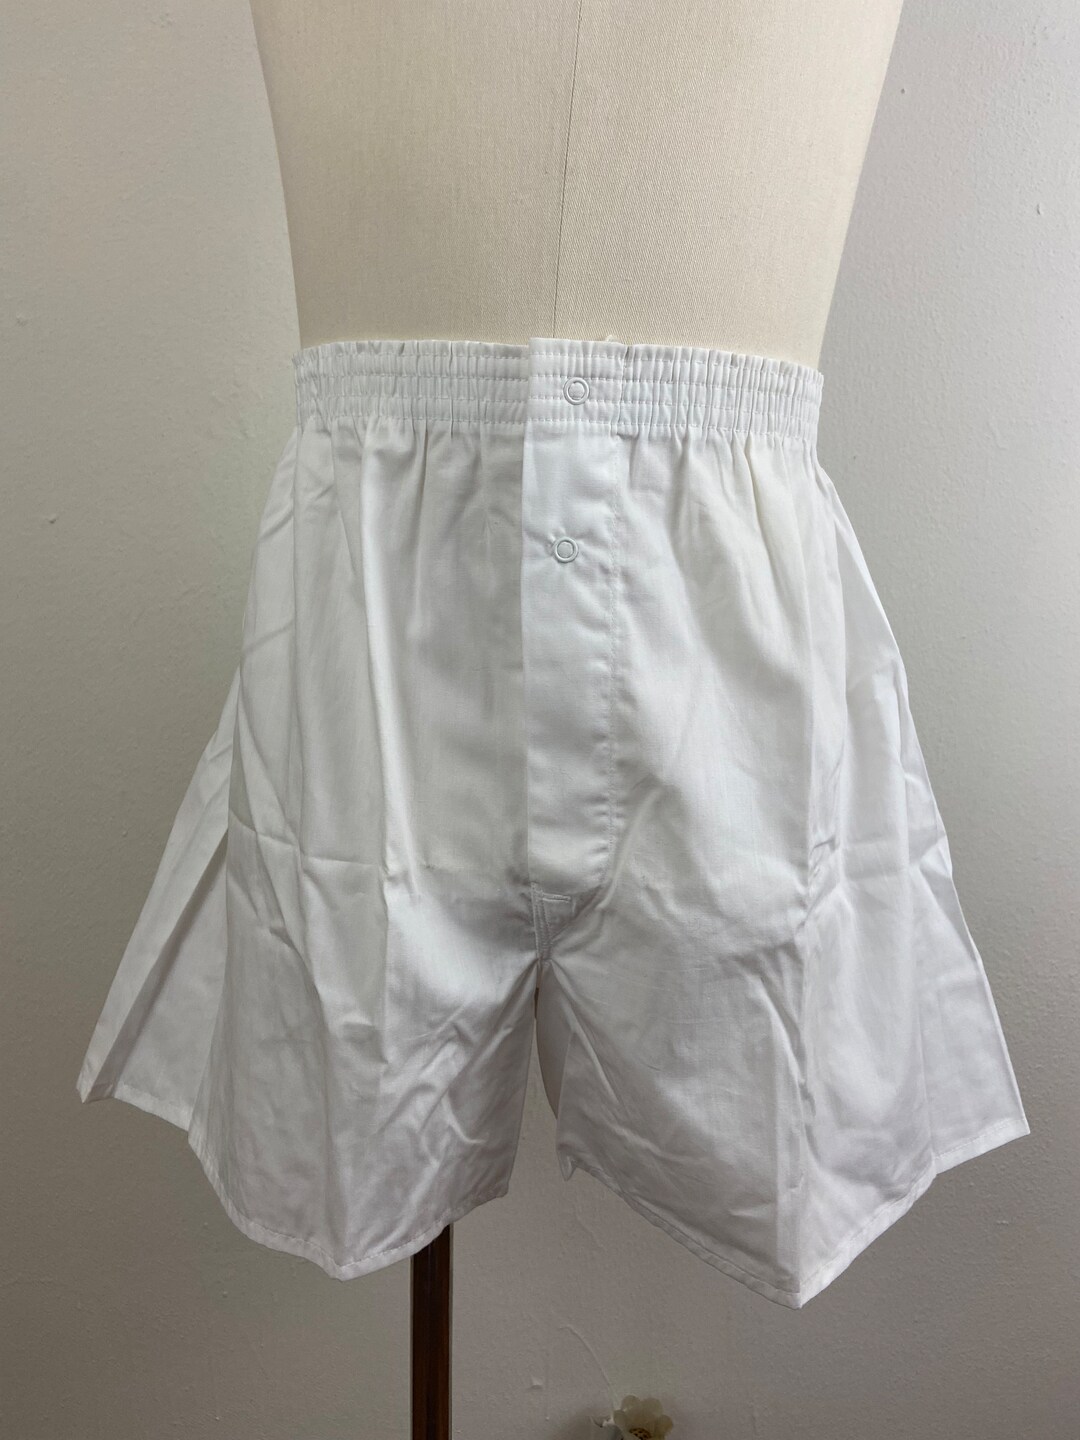 Vintage DEAD STOCK Mens White Boxer Short 2pc Set From 60s to 70s, 100% ...